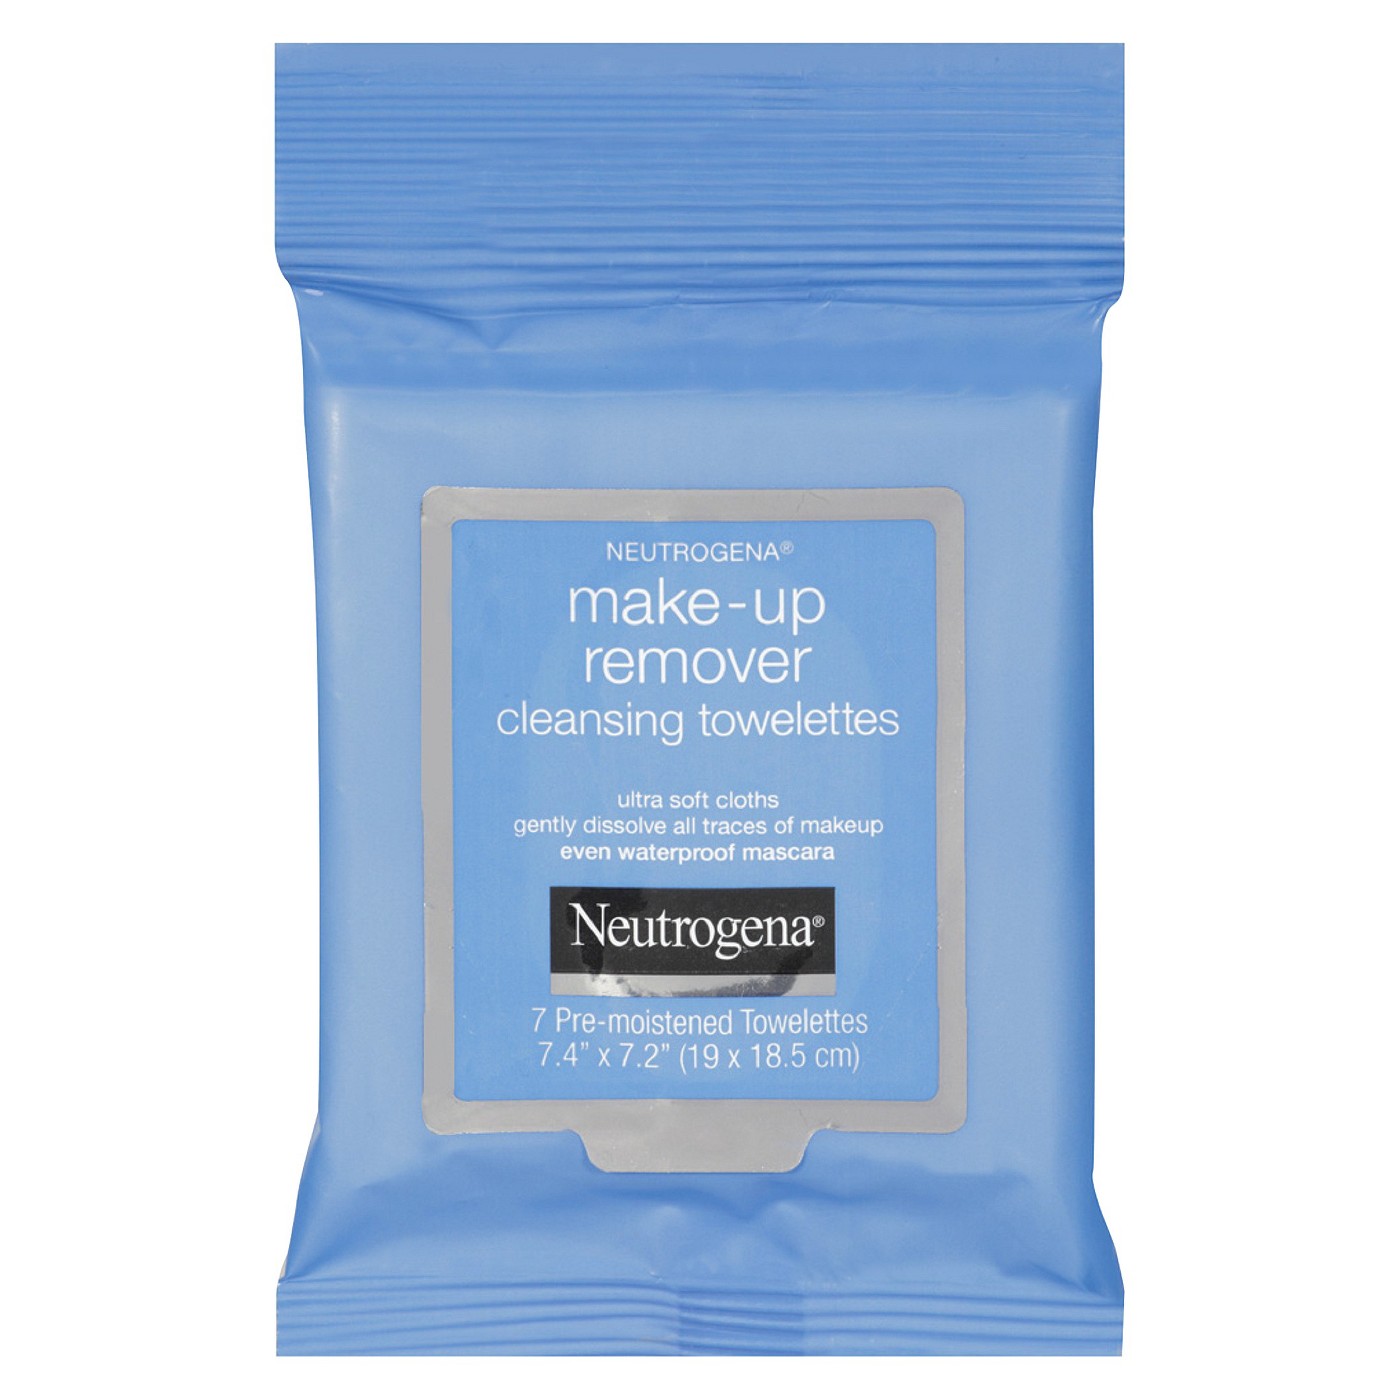 Makeup Removing Wipes